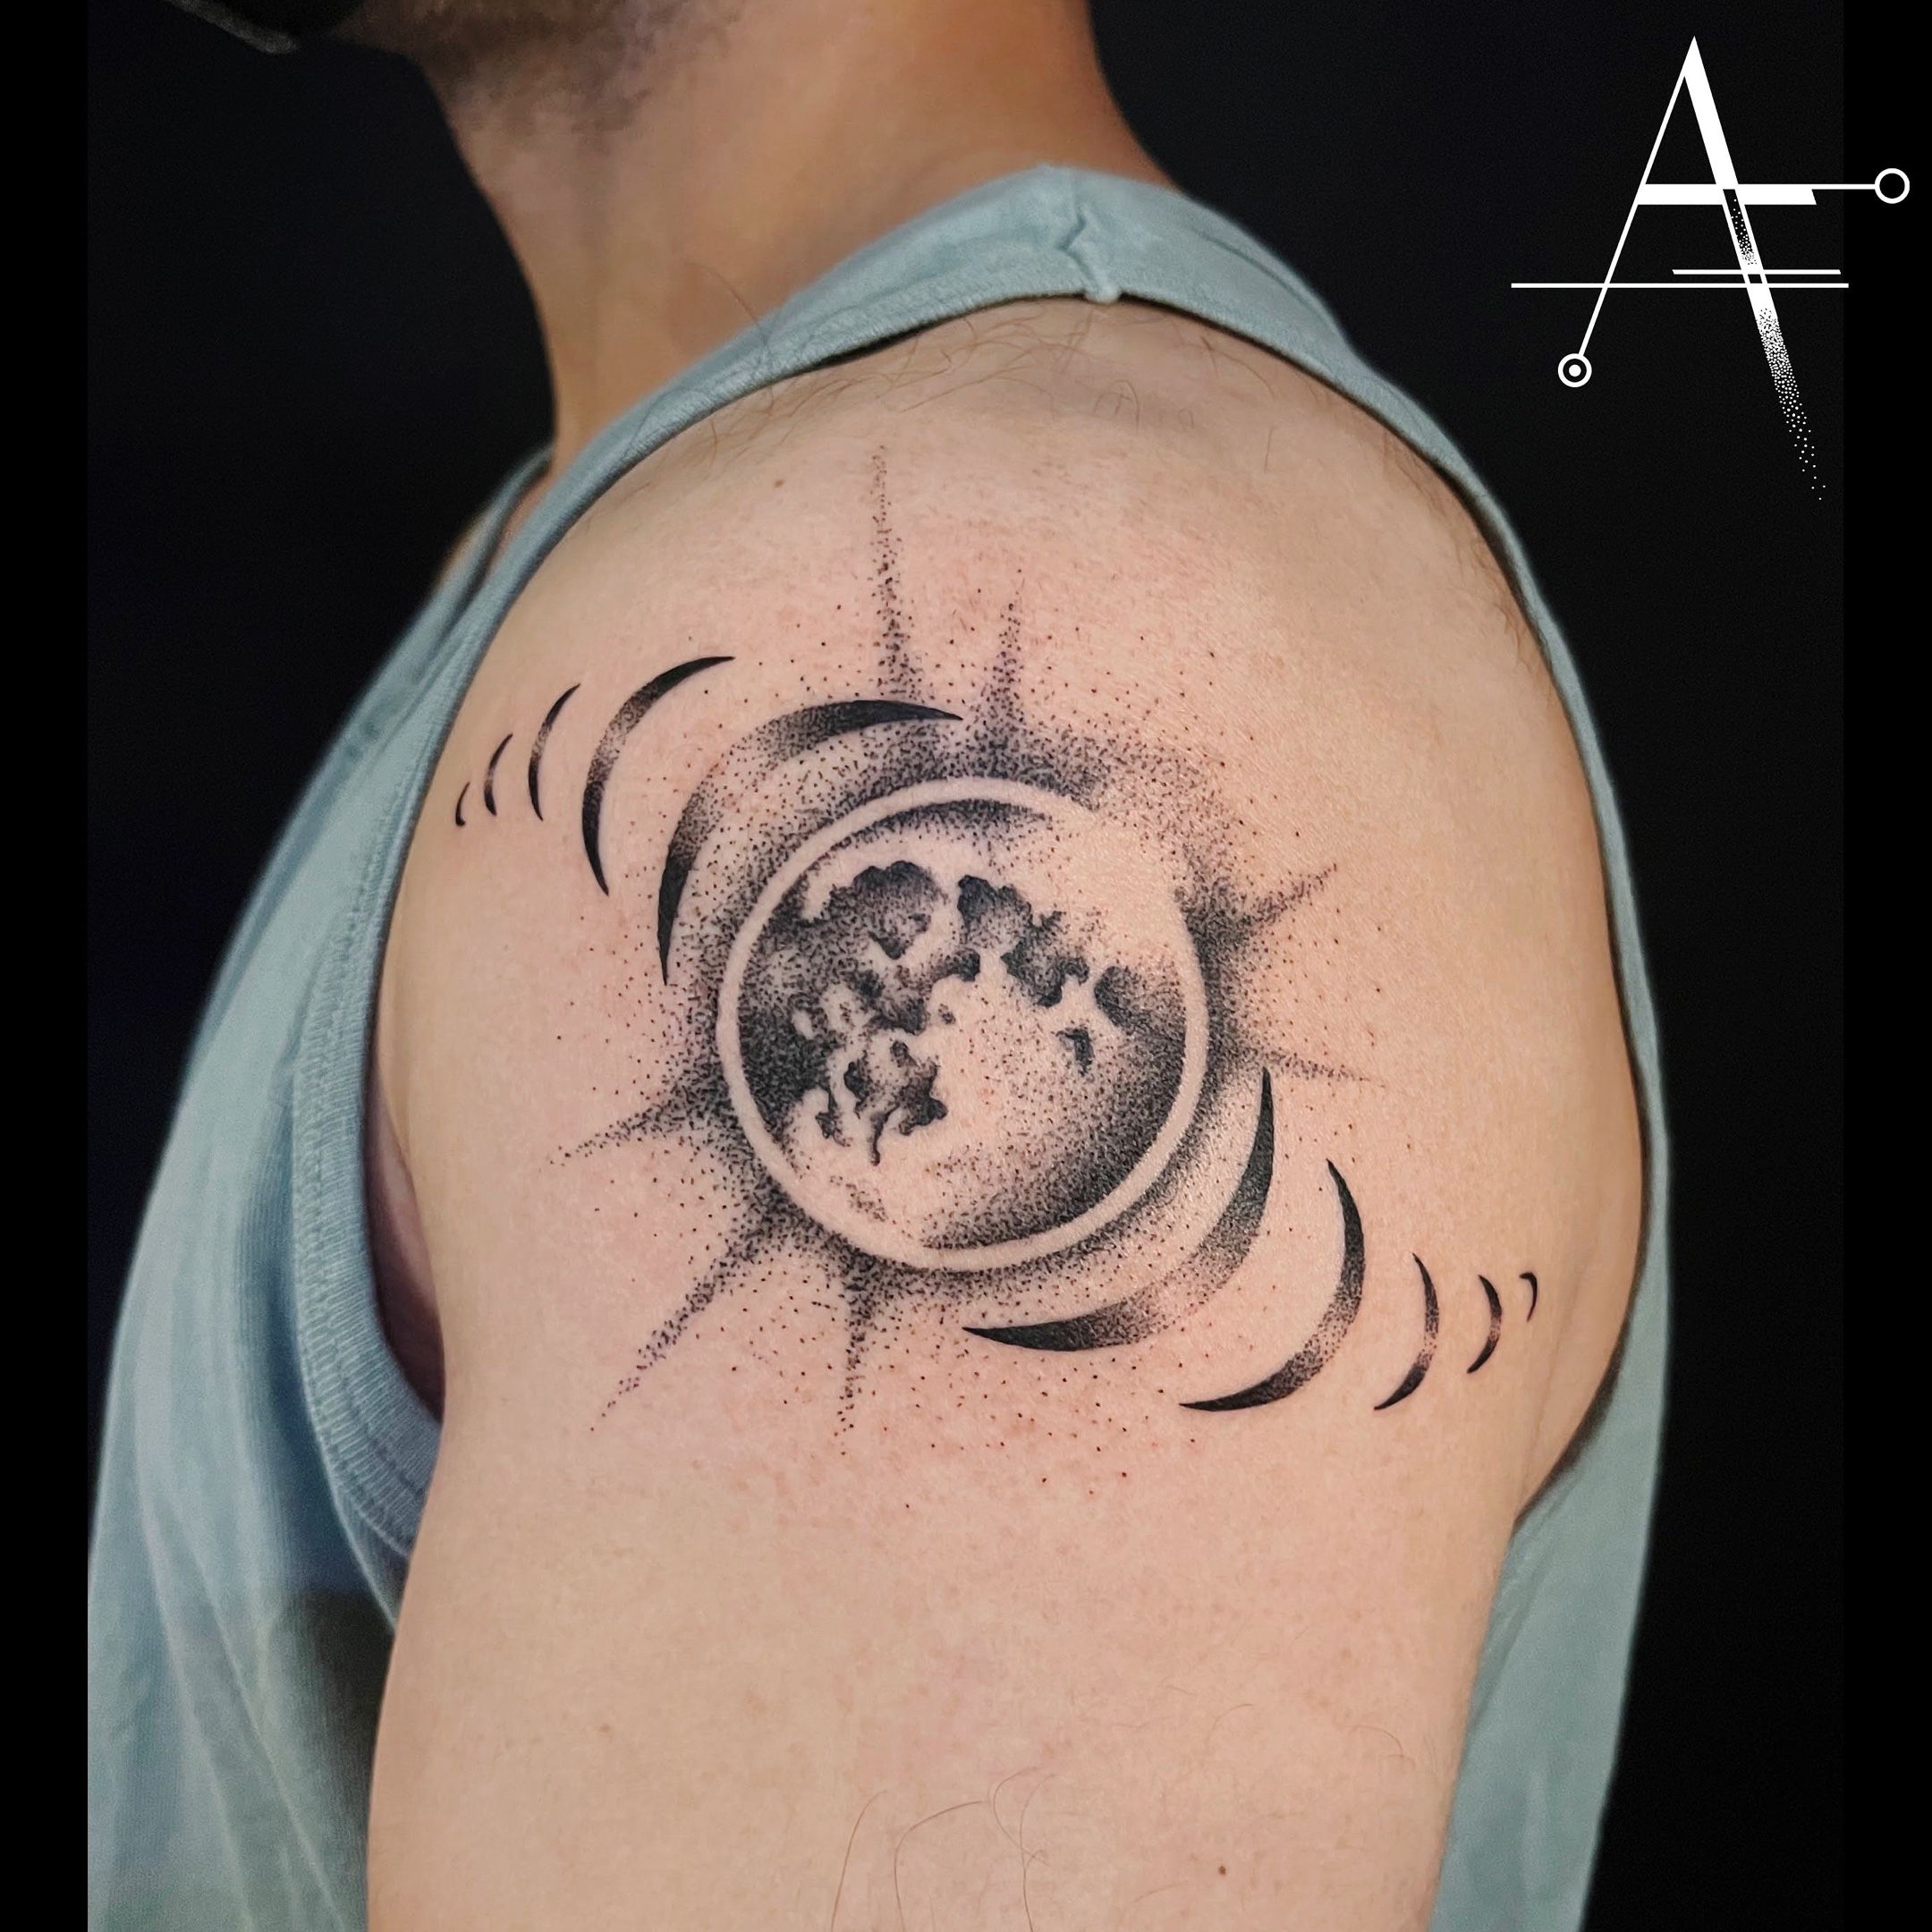 Eclipse Tattoo and Piercing Studio Brighton  Tattoo And Piercing Shop